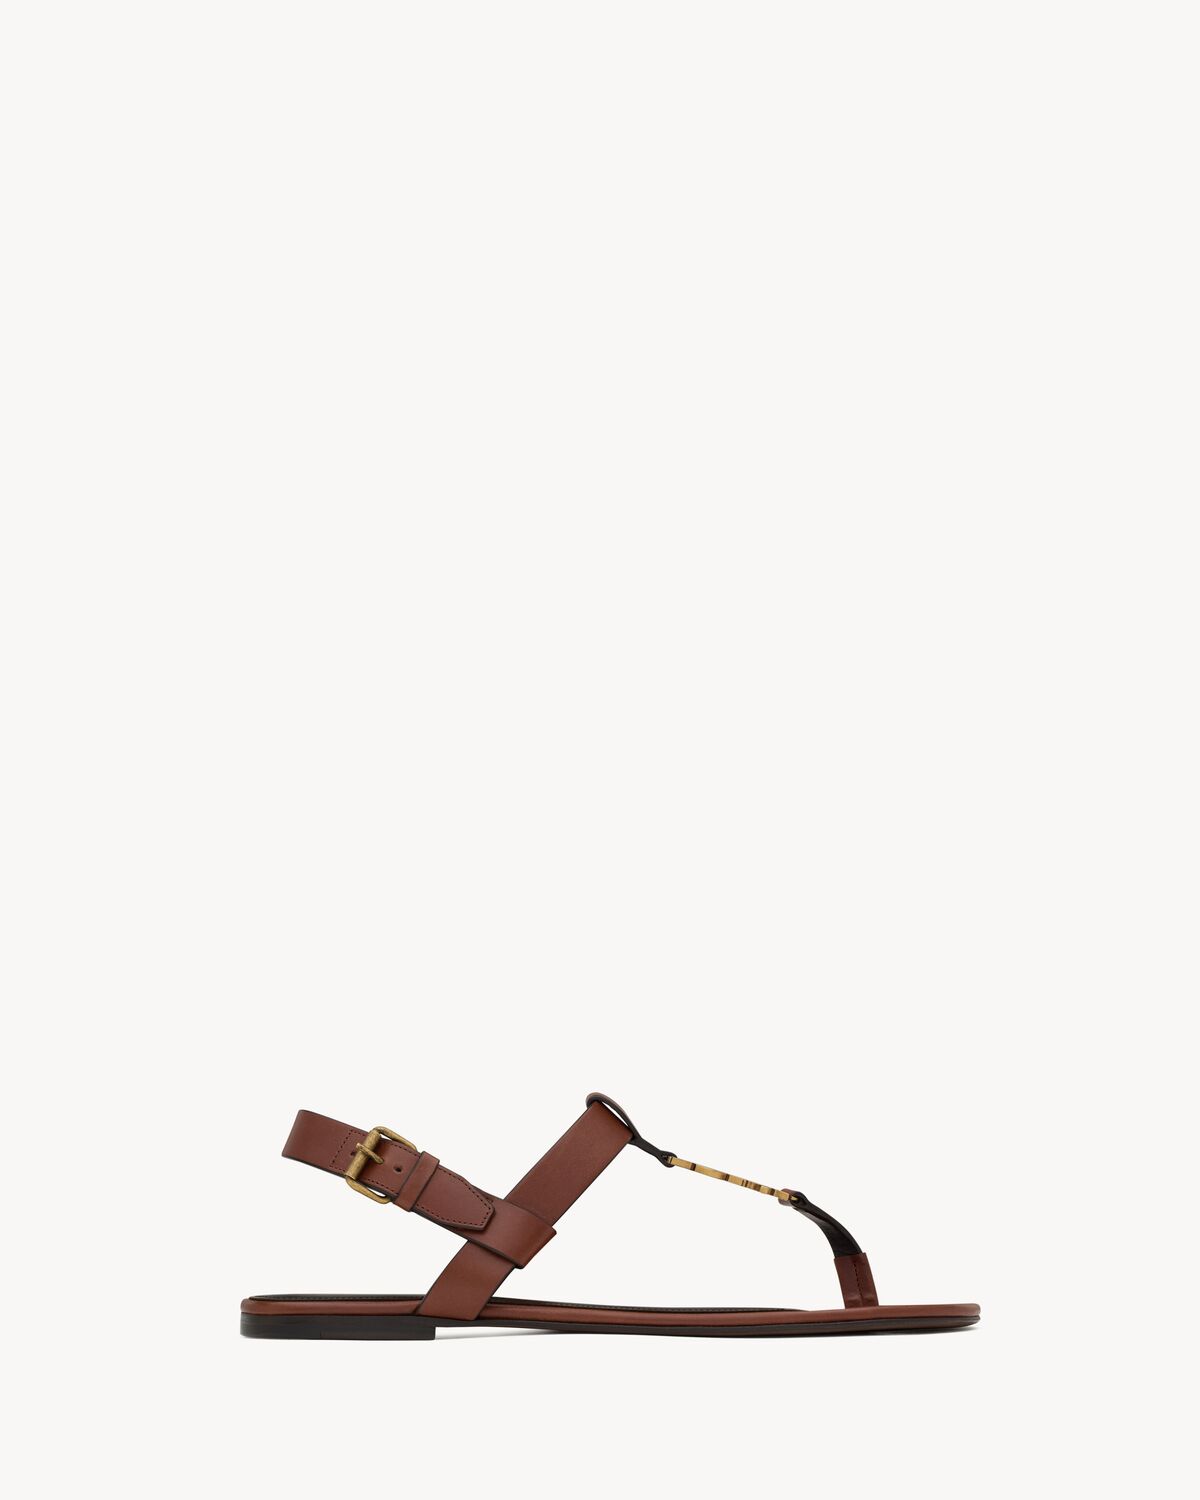 CASSANDRE sandals in smooth leather